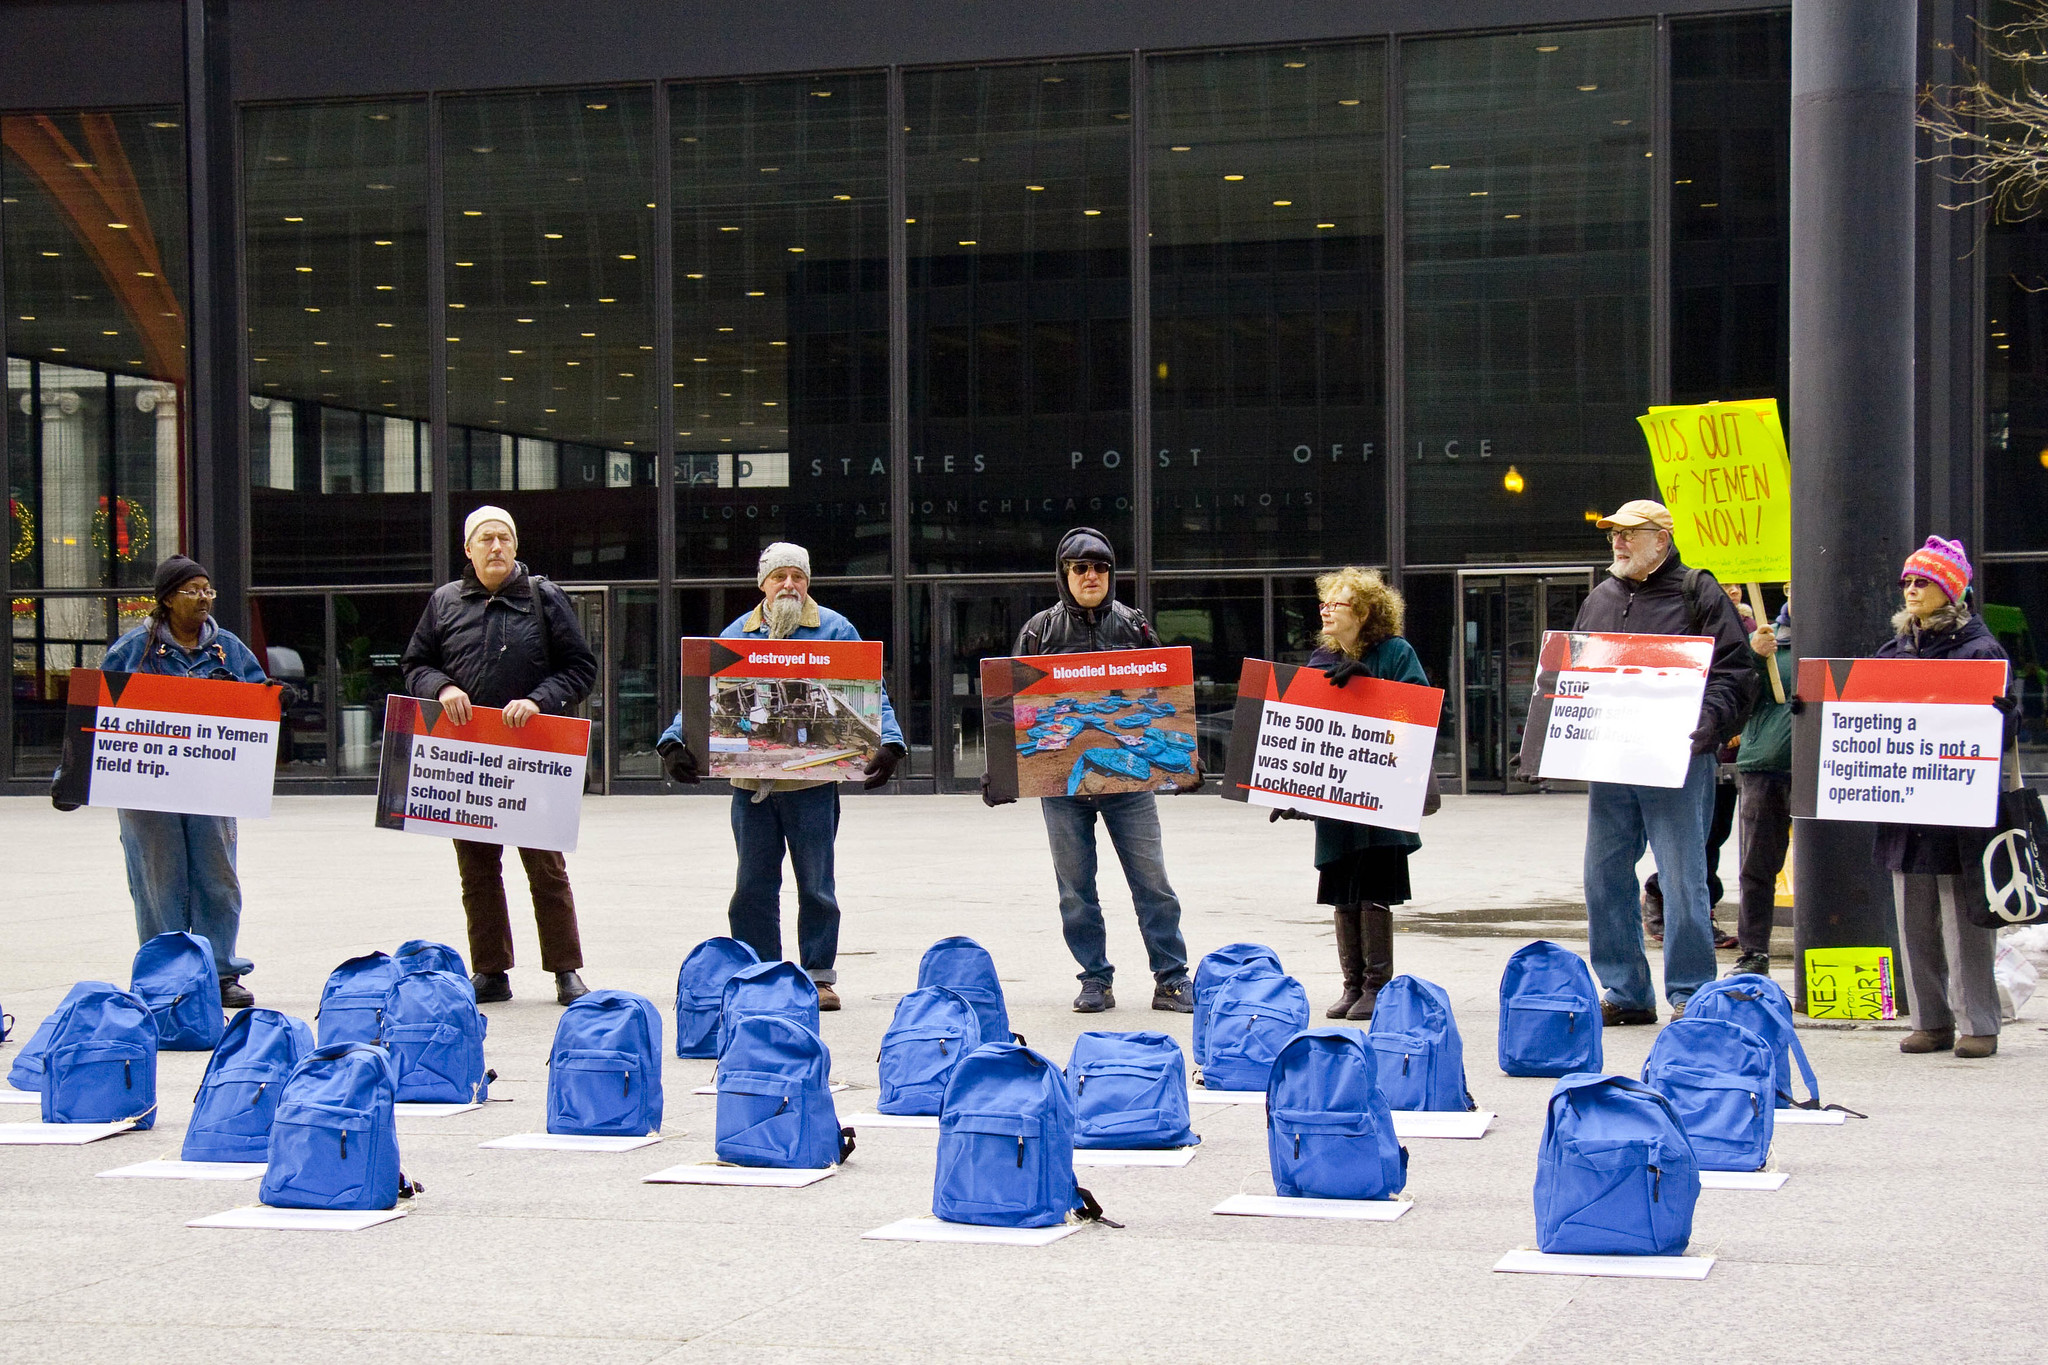 Seven campaigners holding signs standing behind 20 blue school bags. Signs are at a distance but appear to relate to Yemen and a school bus bombing